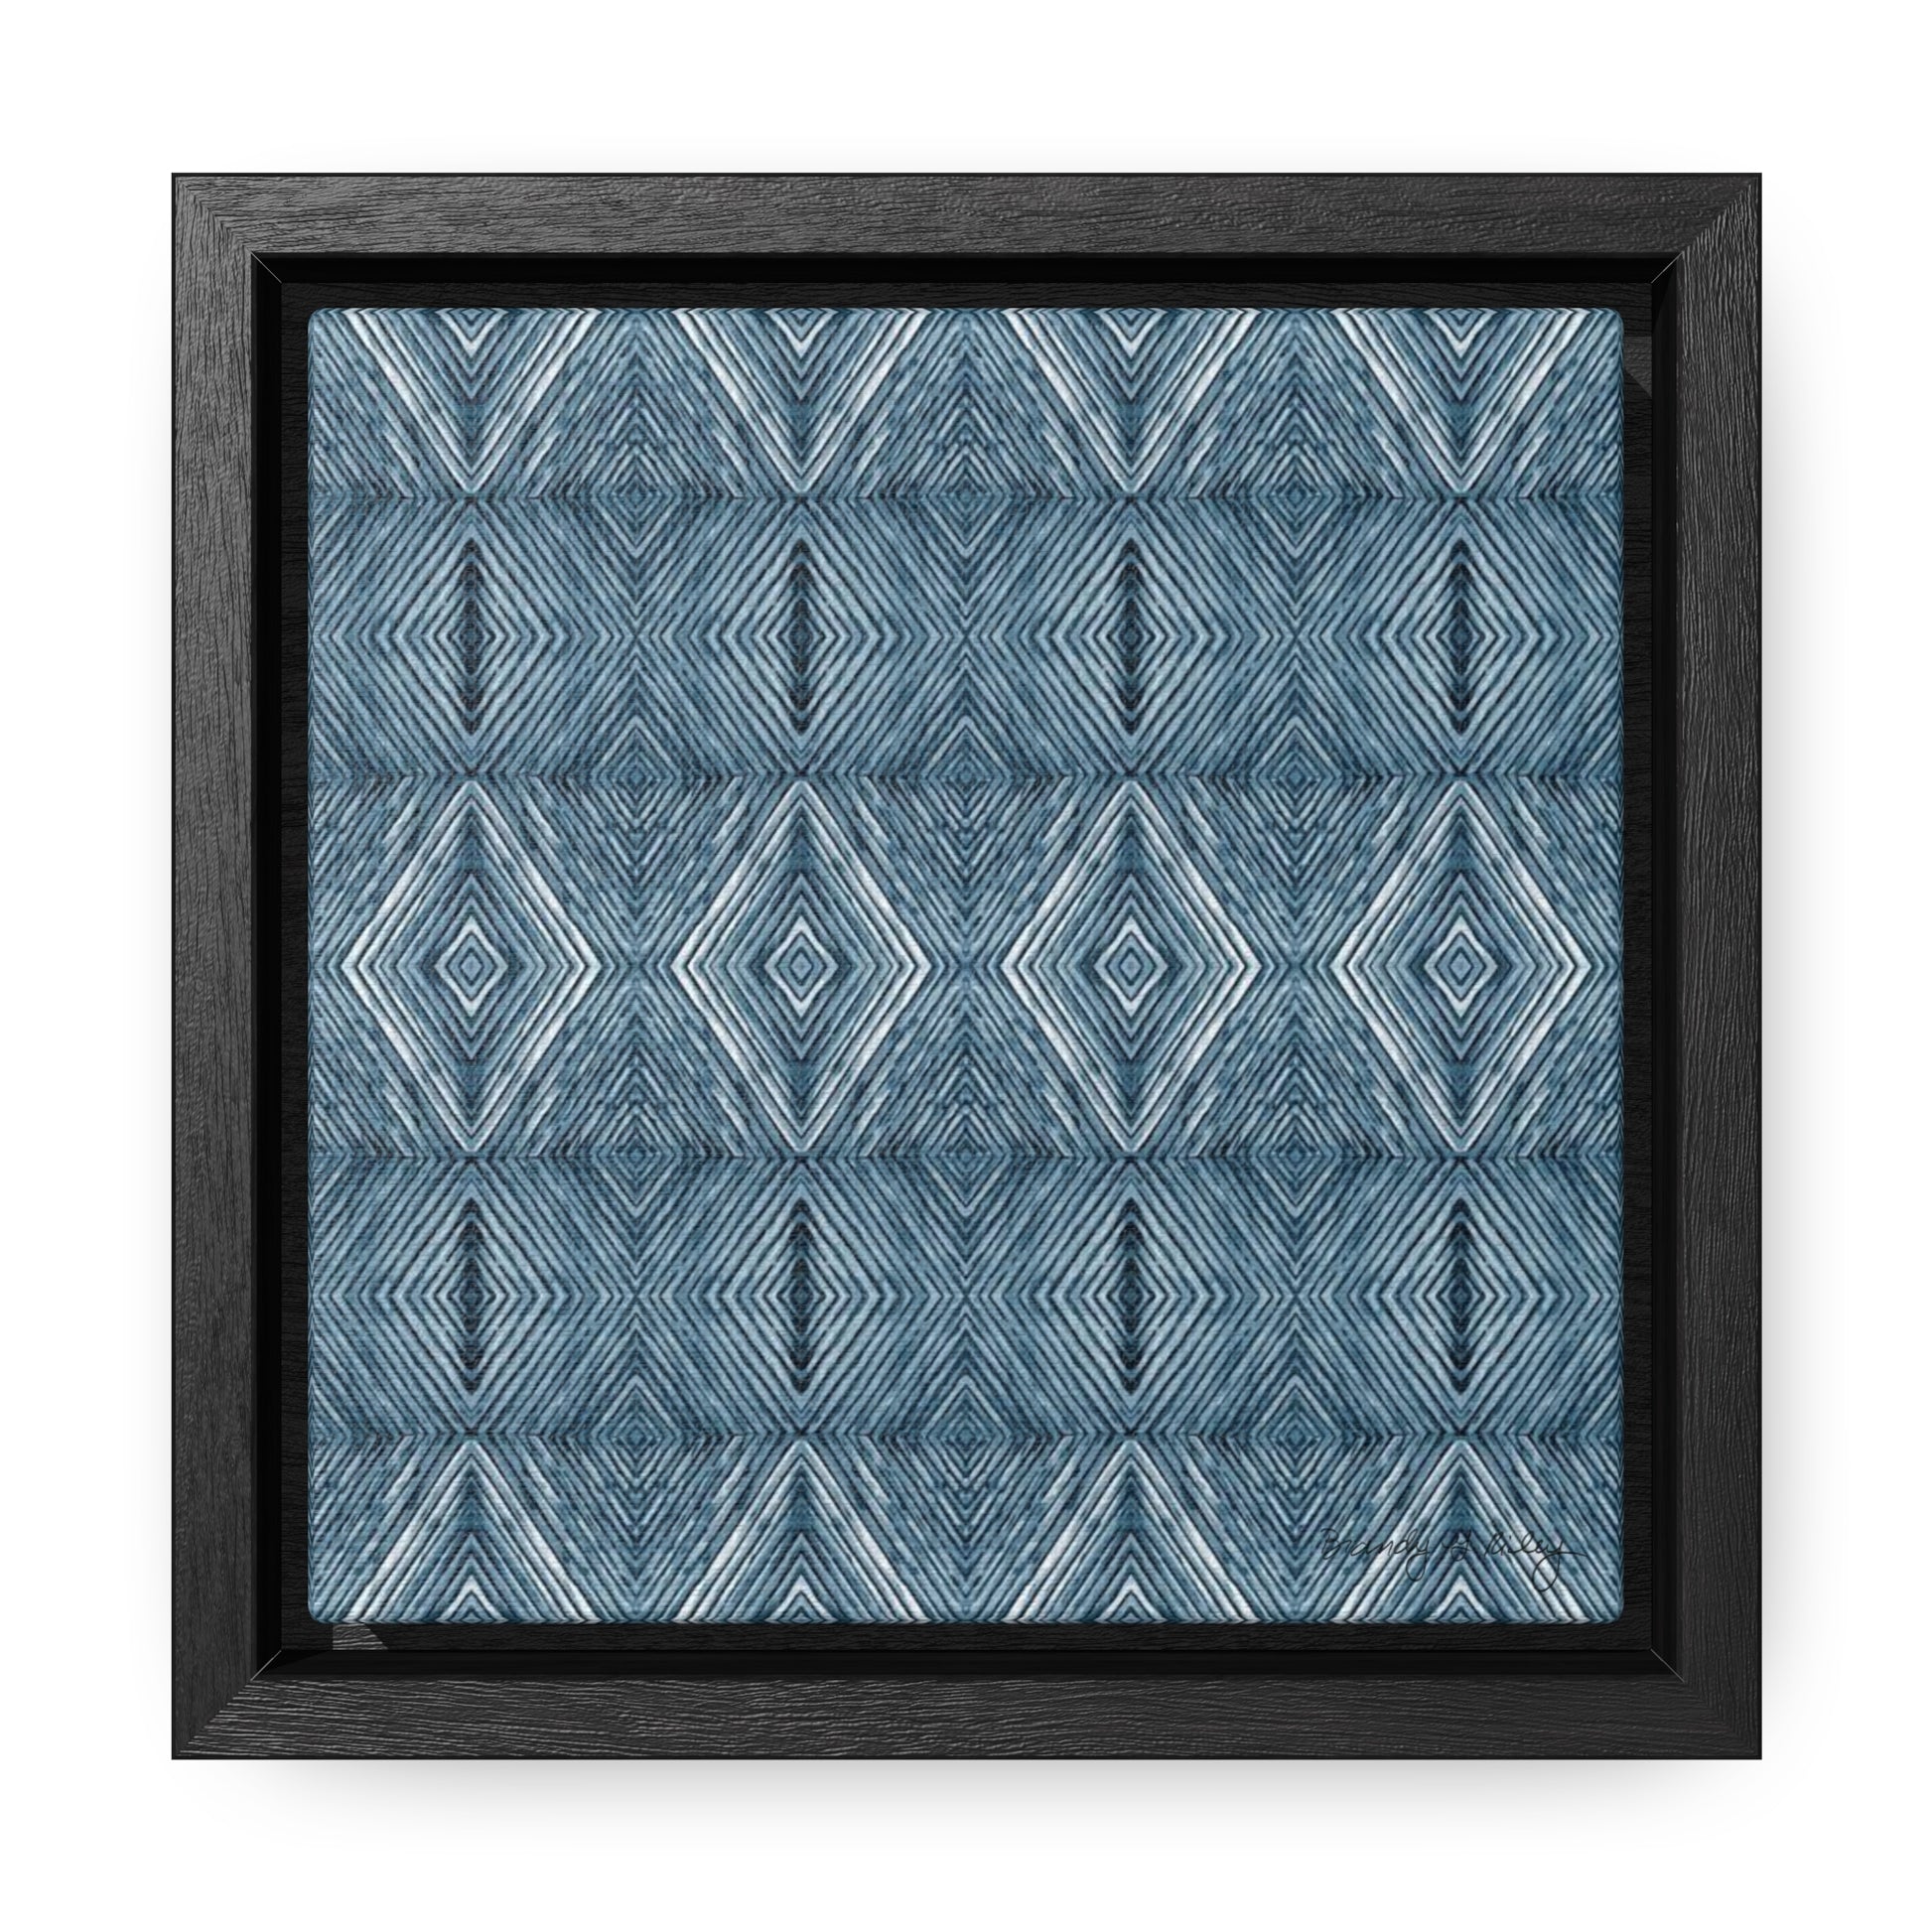 Mini framed artist canvas featuring a blue abstract diamond pattern in a black frame